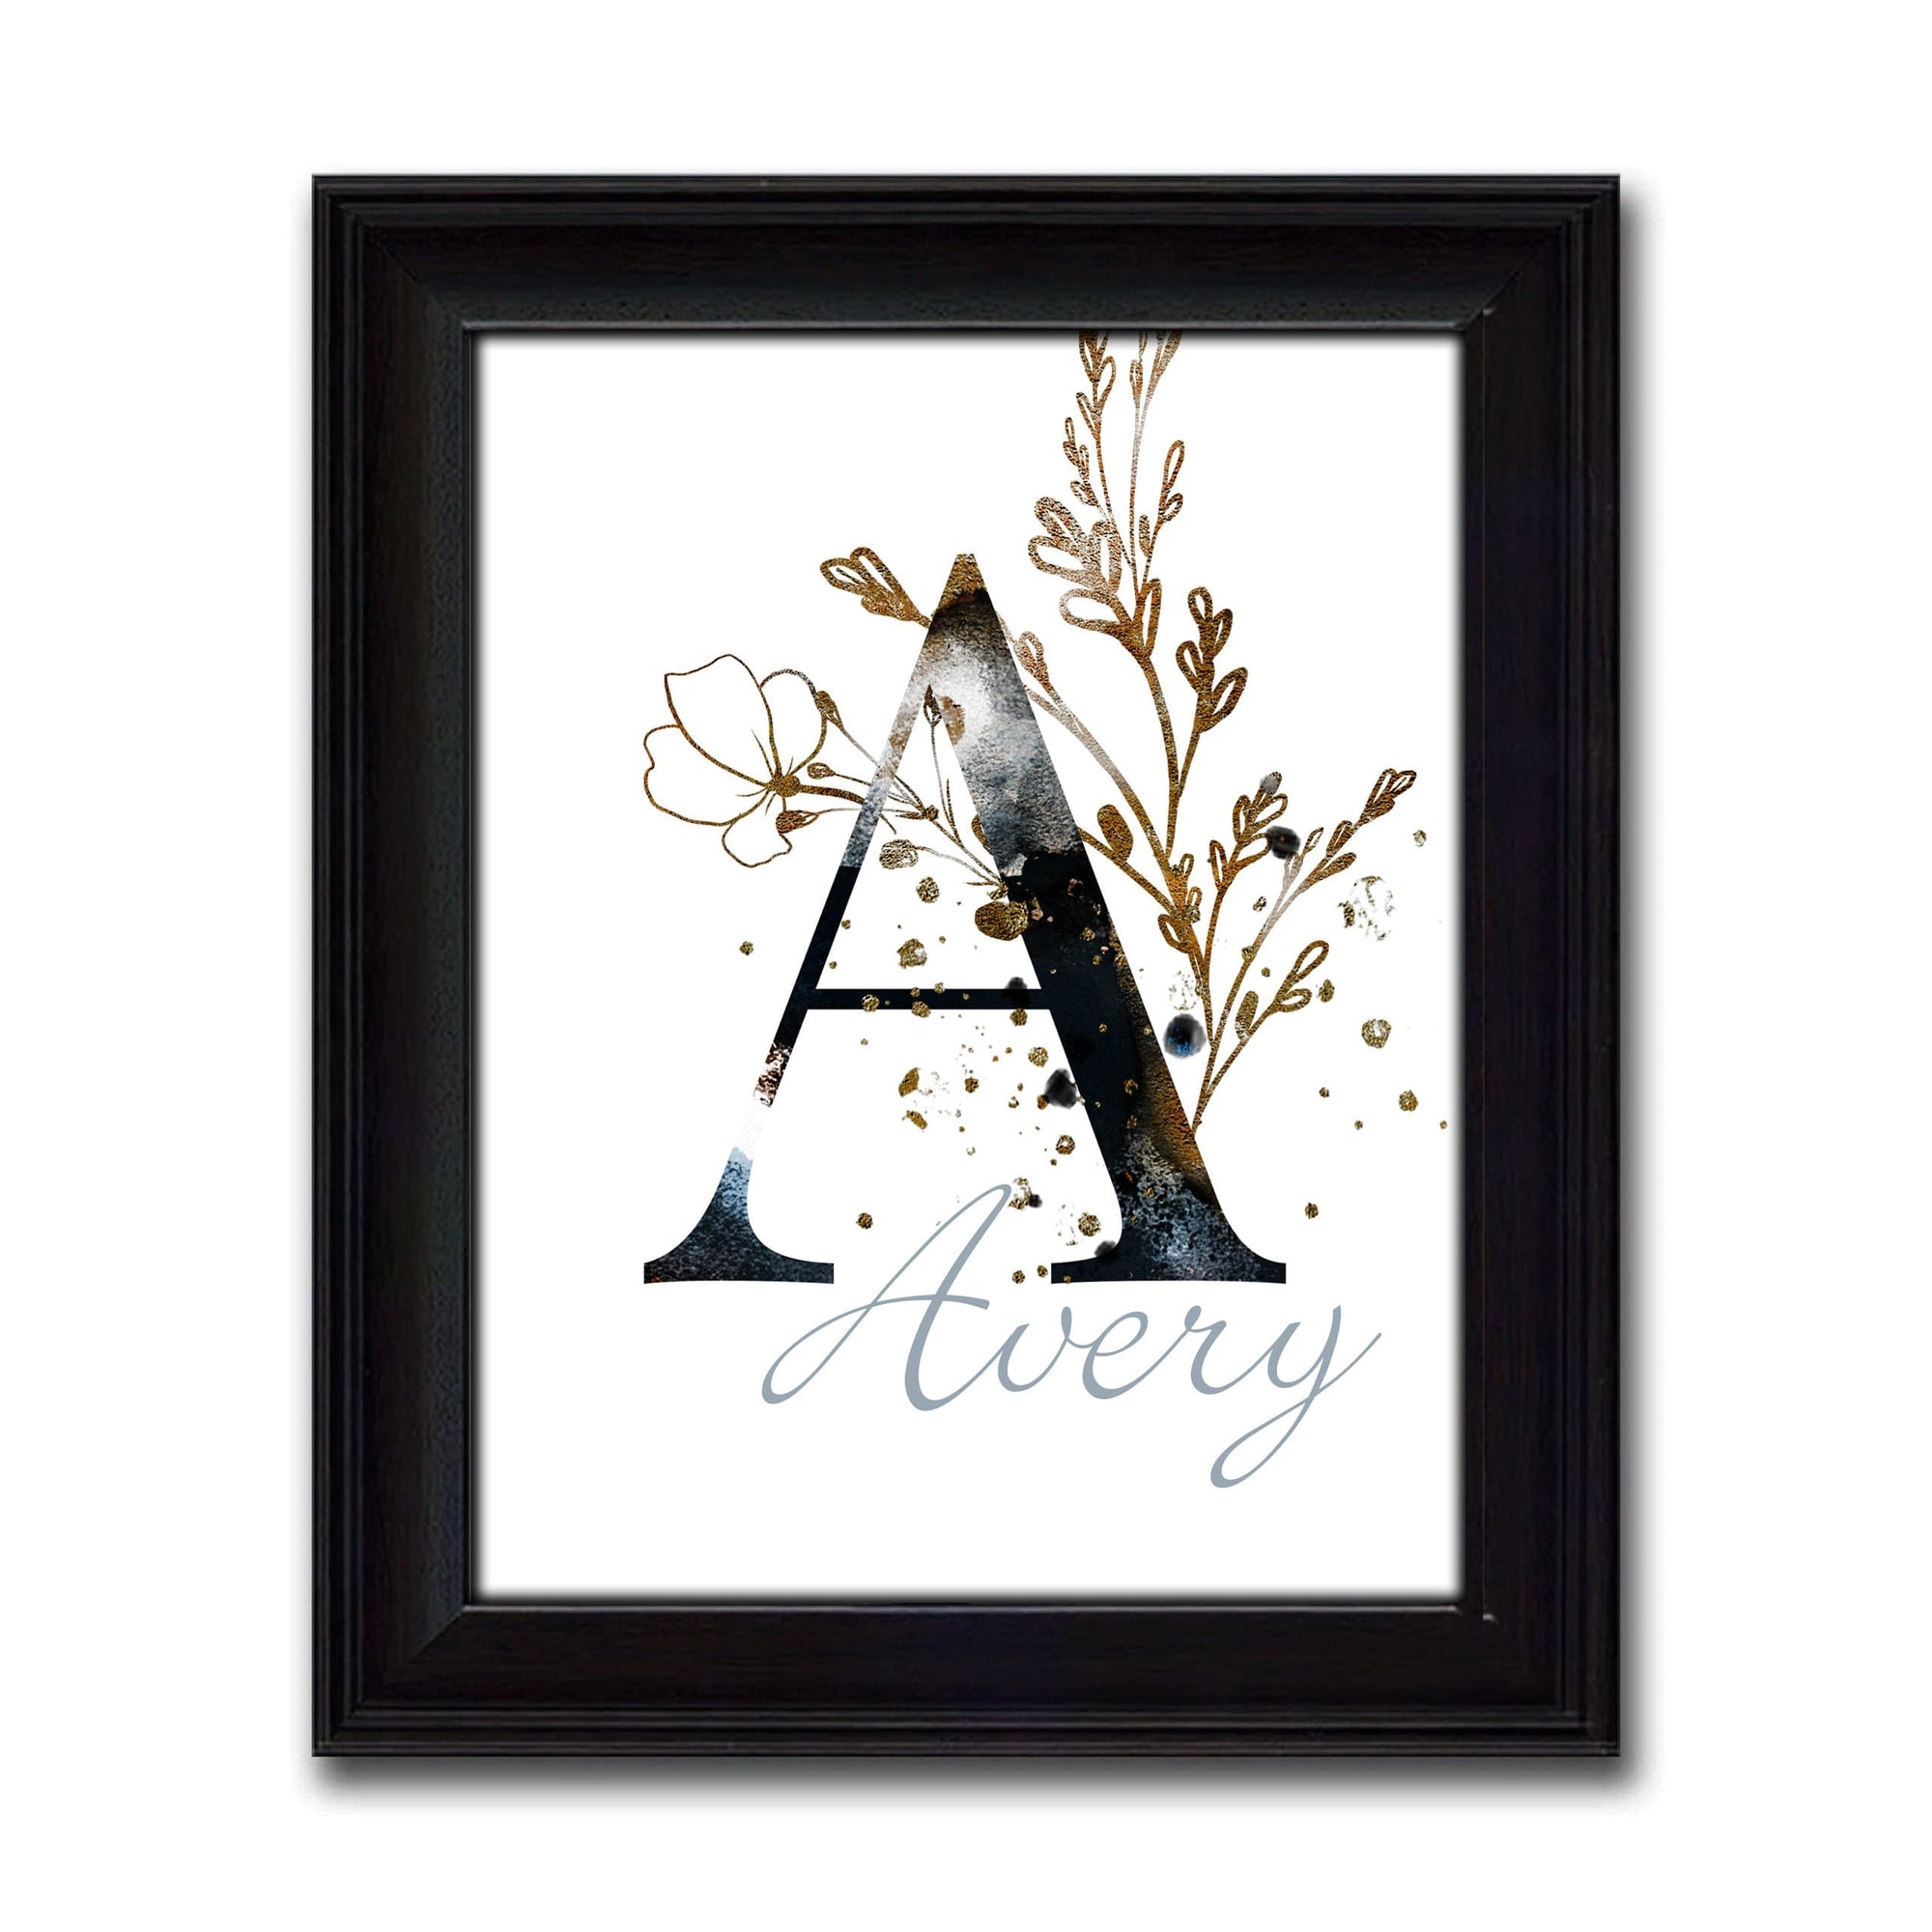 Personalized monogram wall decor gift for her